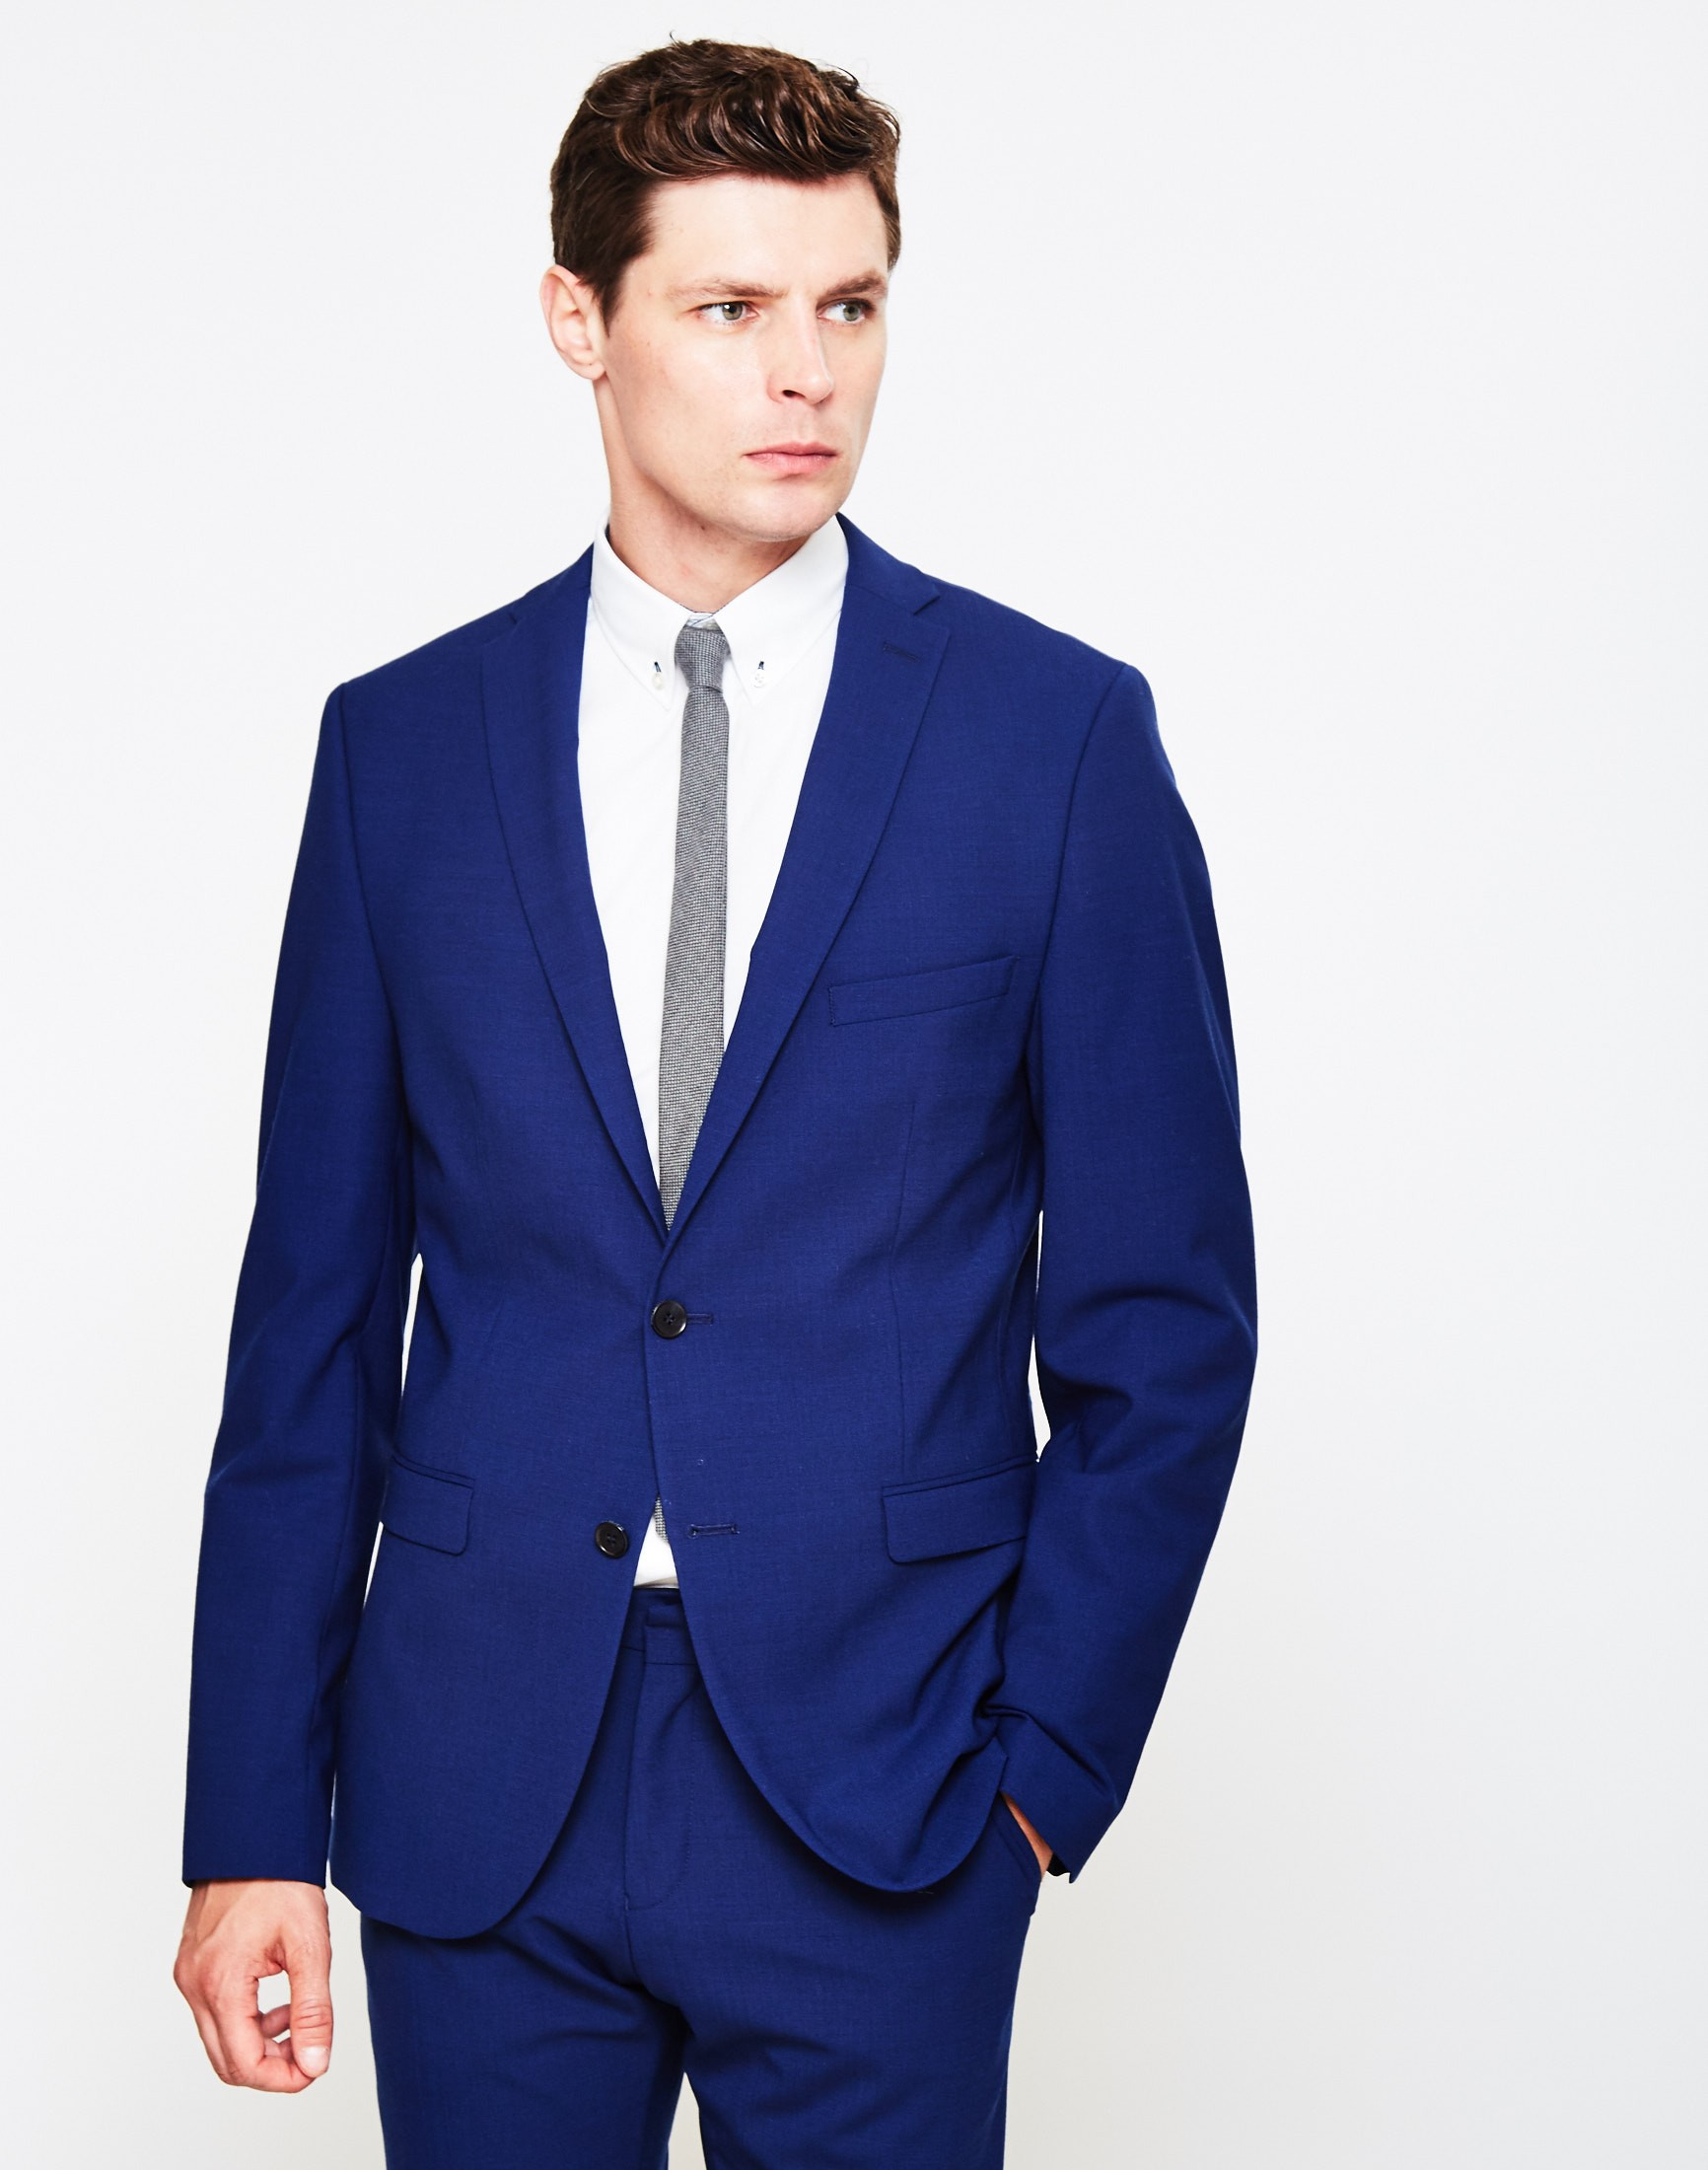 Lyst - Selected Mylo Don Suit Blazer Blue in Blue for Men